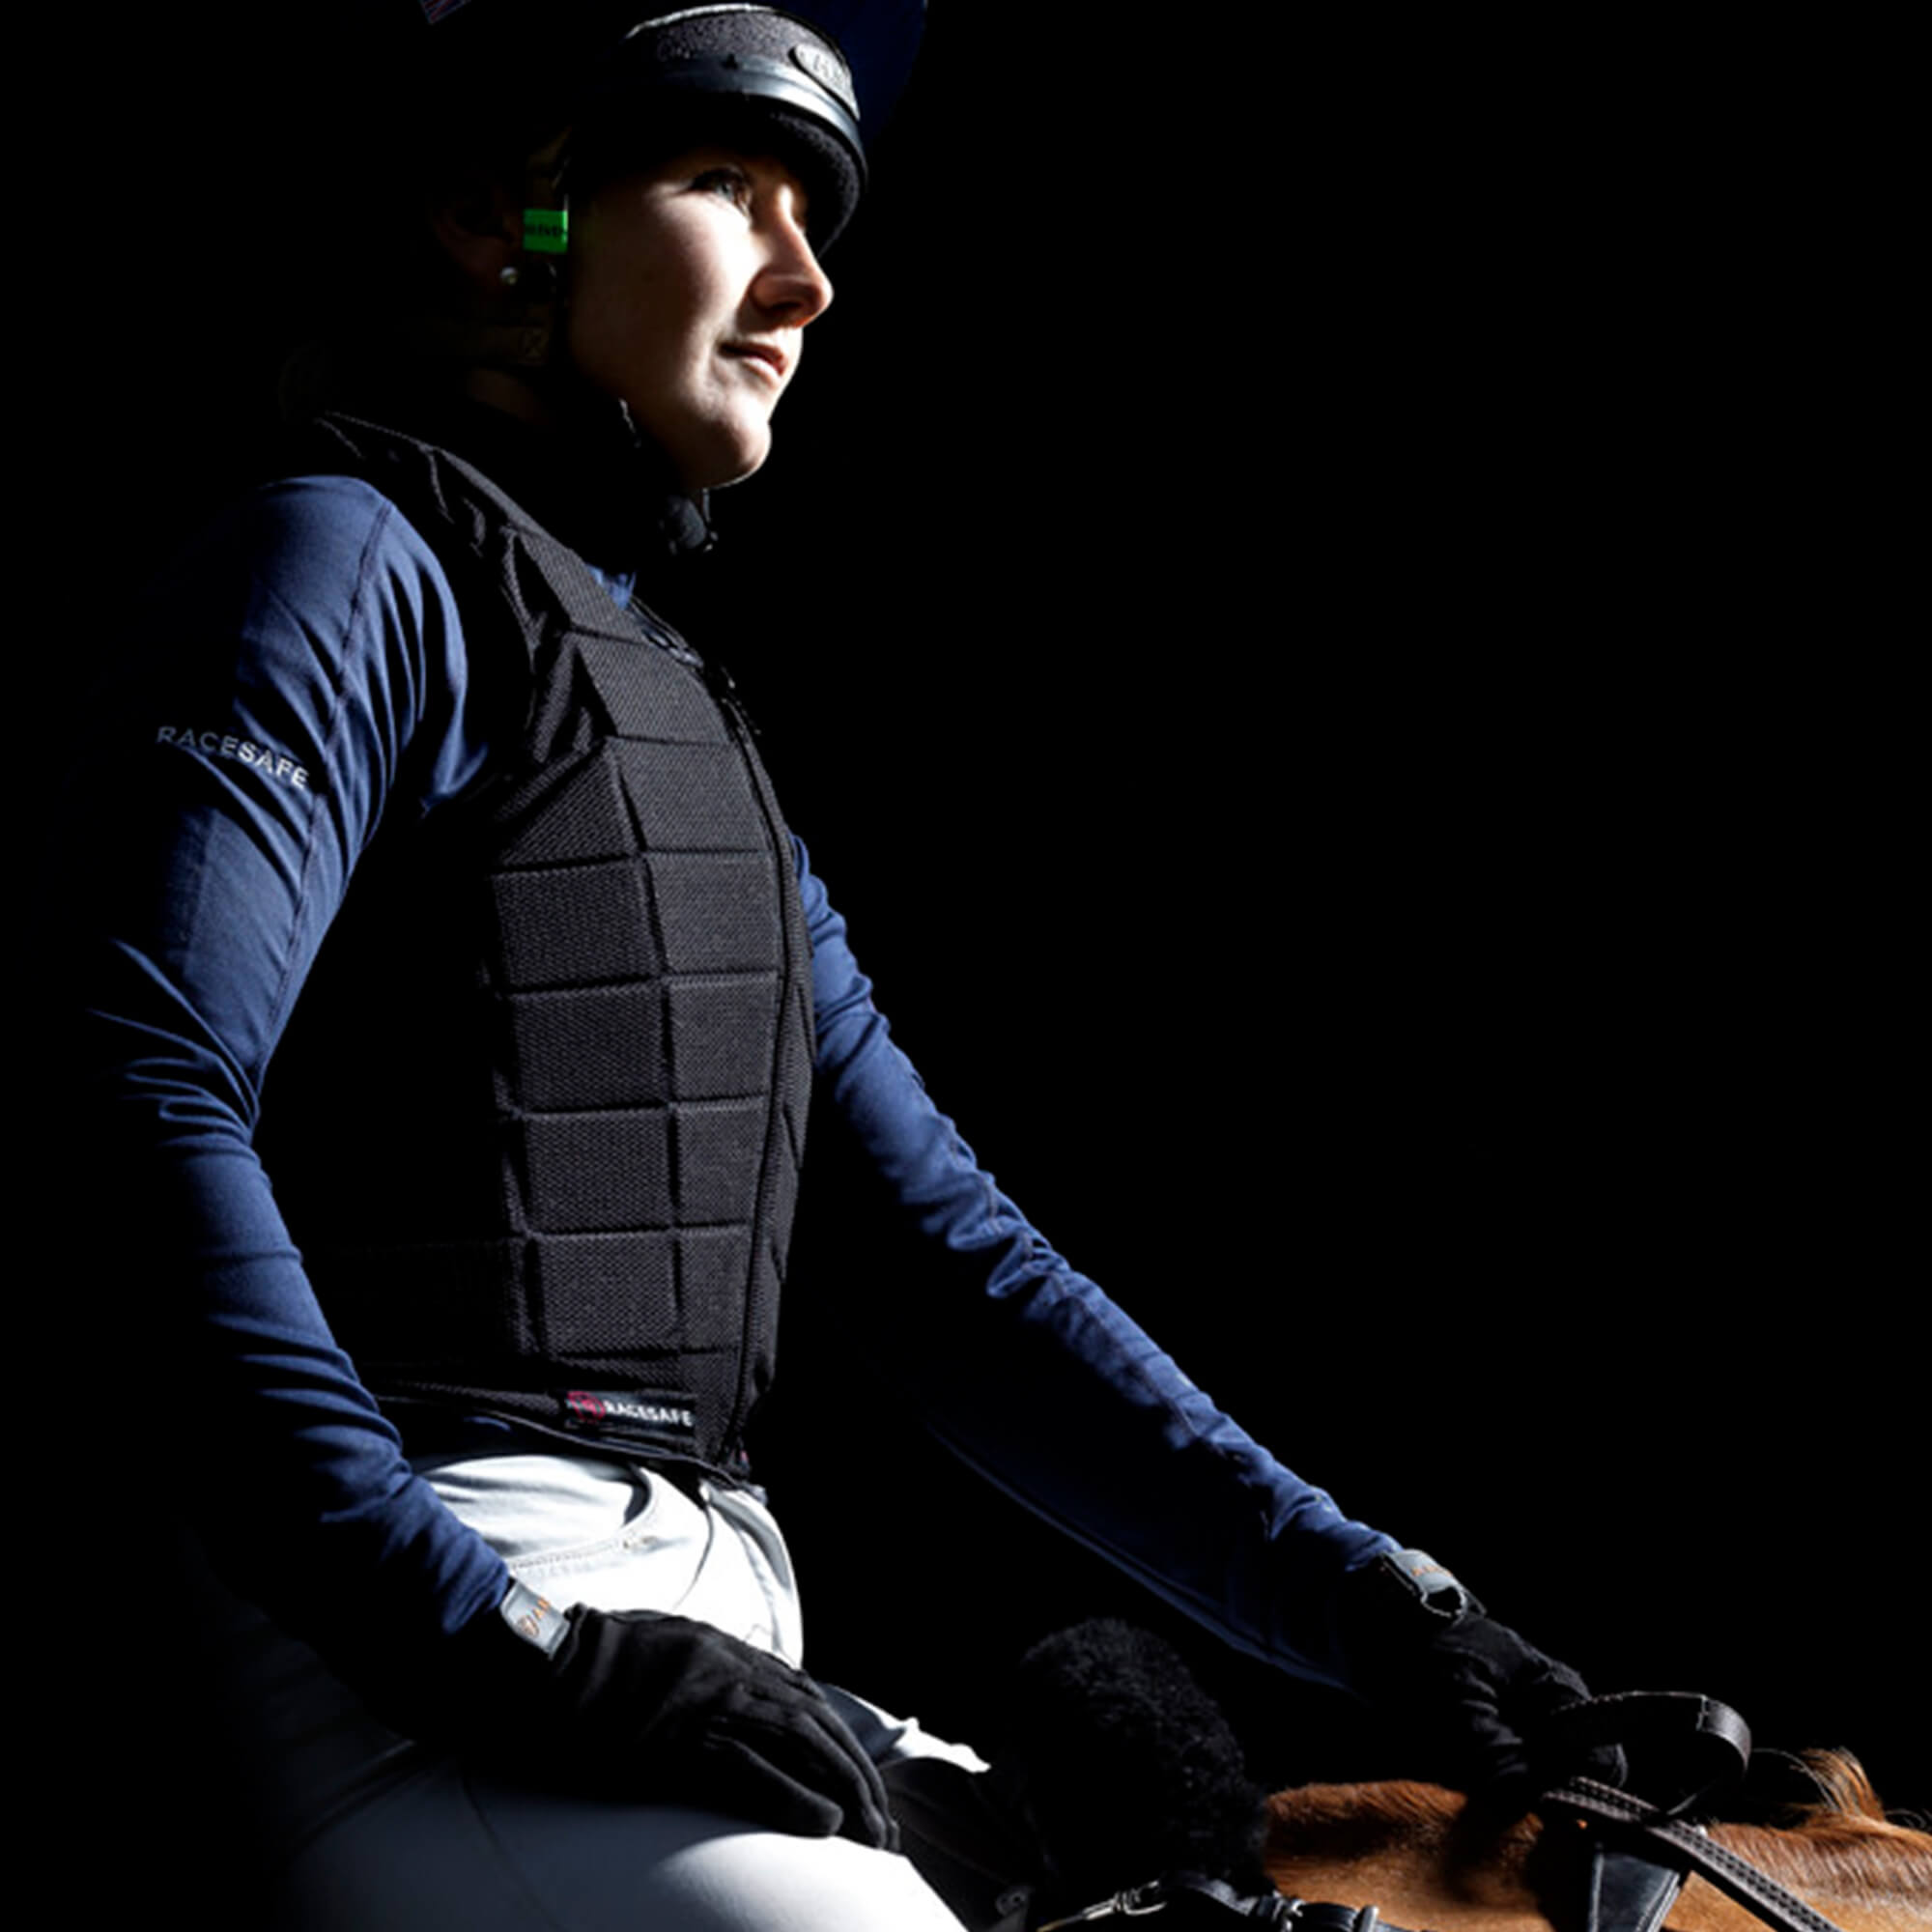 Brand photography for Racesafe, equestrian identity